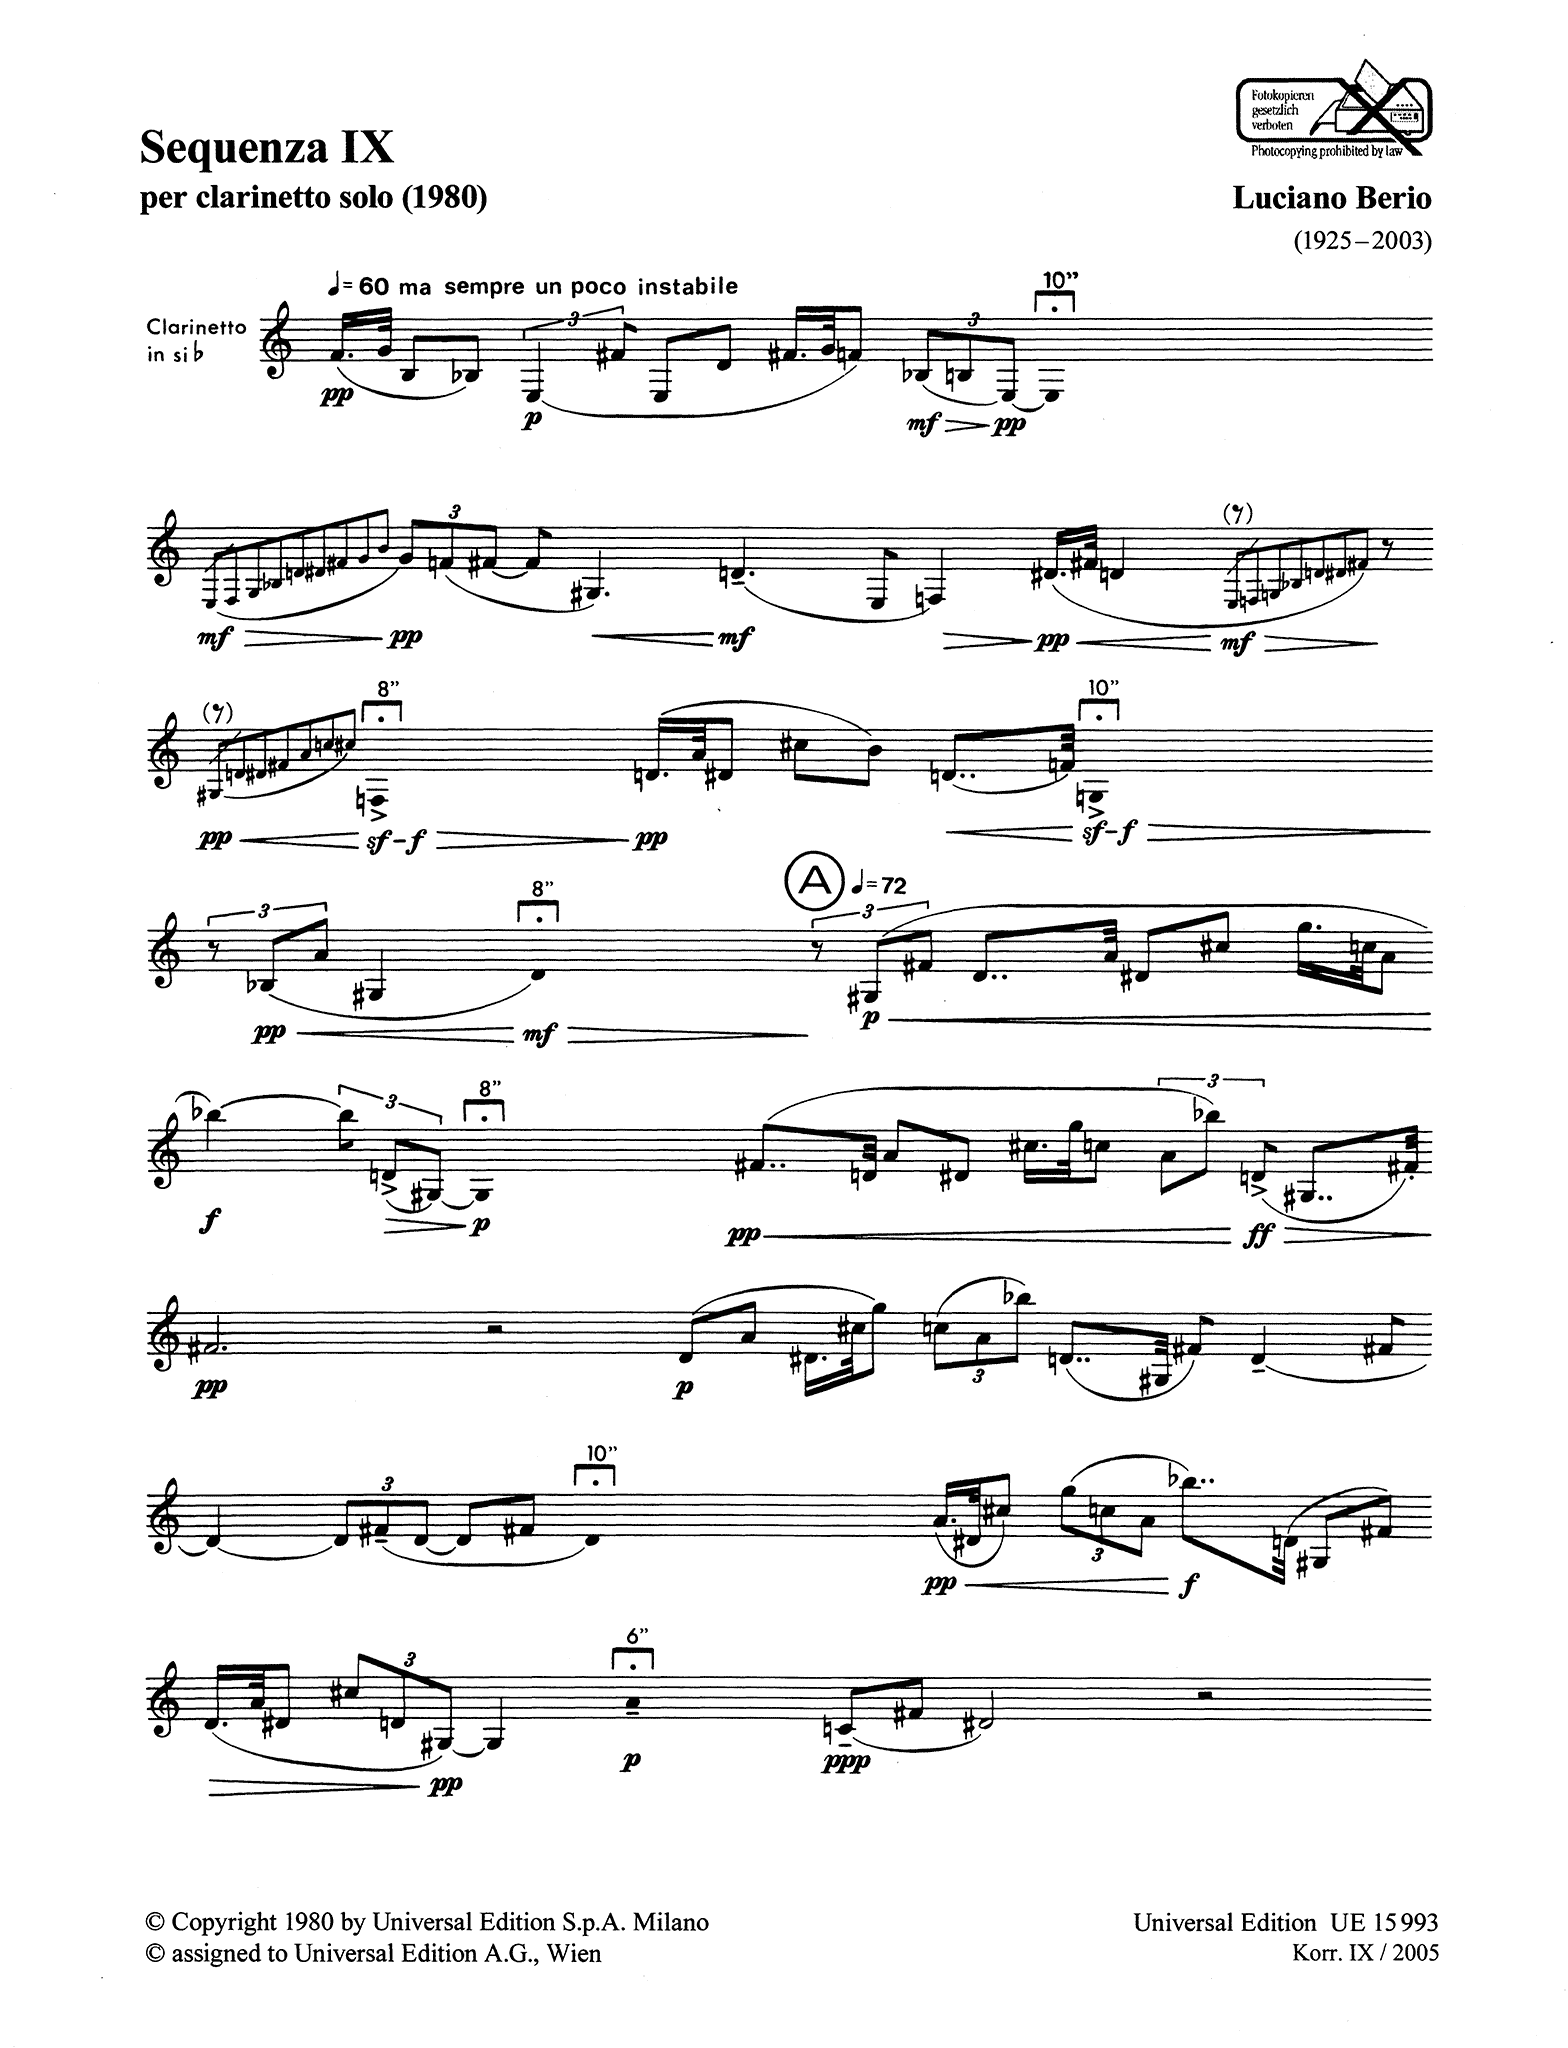 Sequenza IX for clarinet solo Page 1